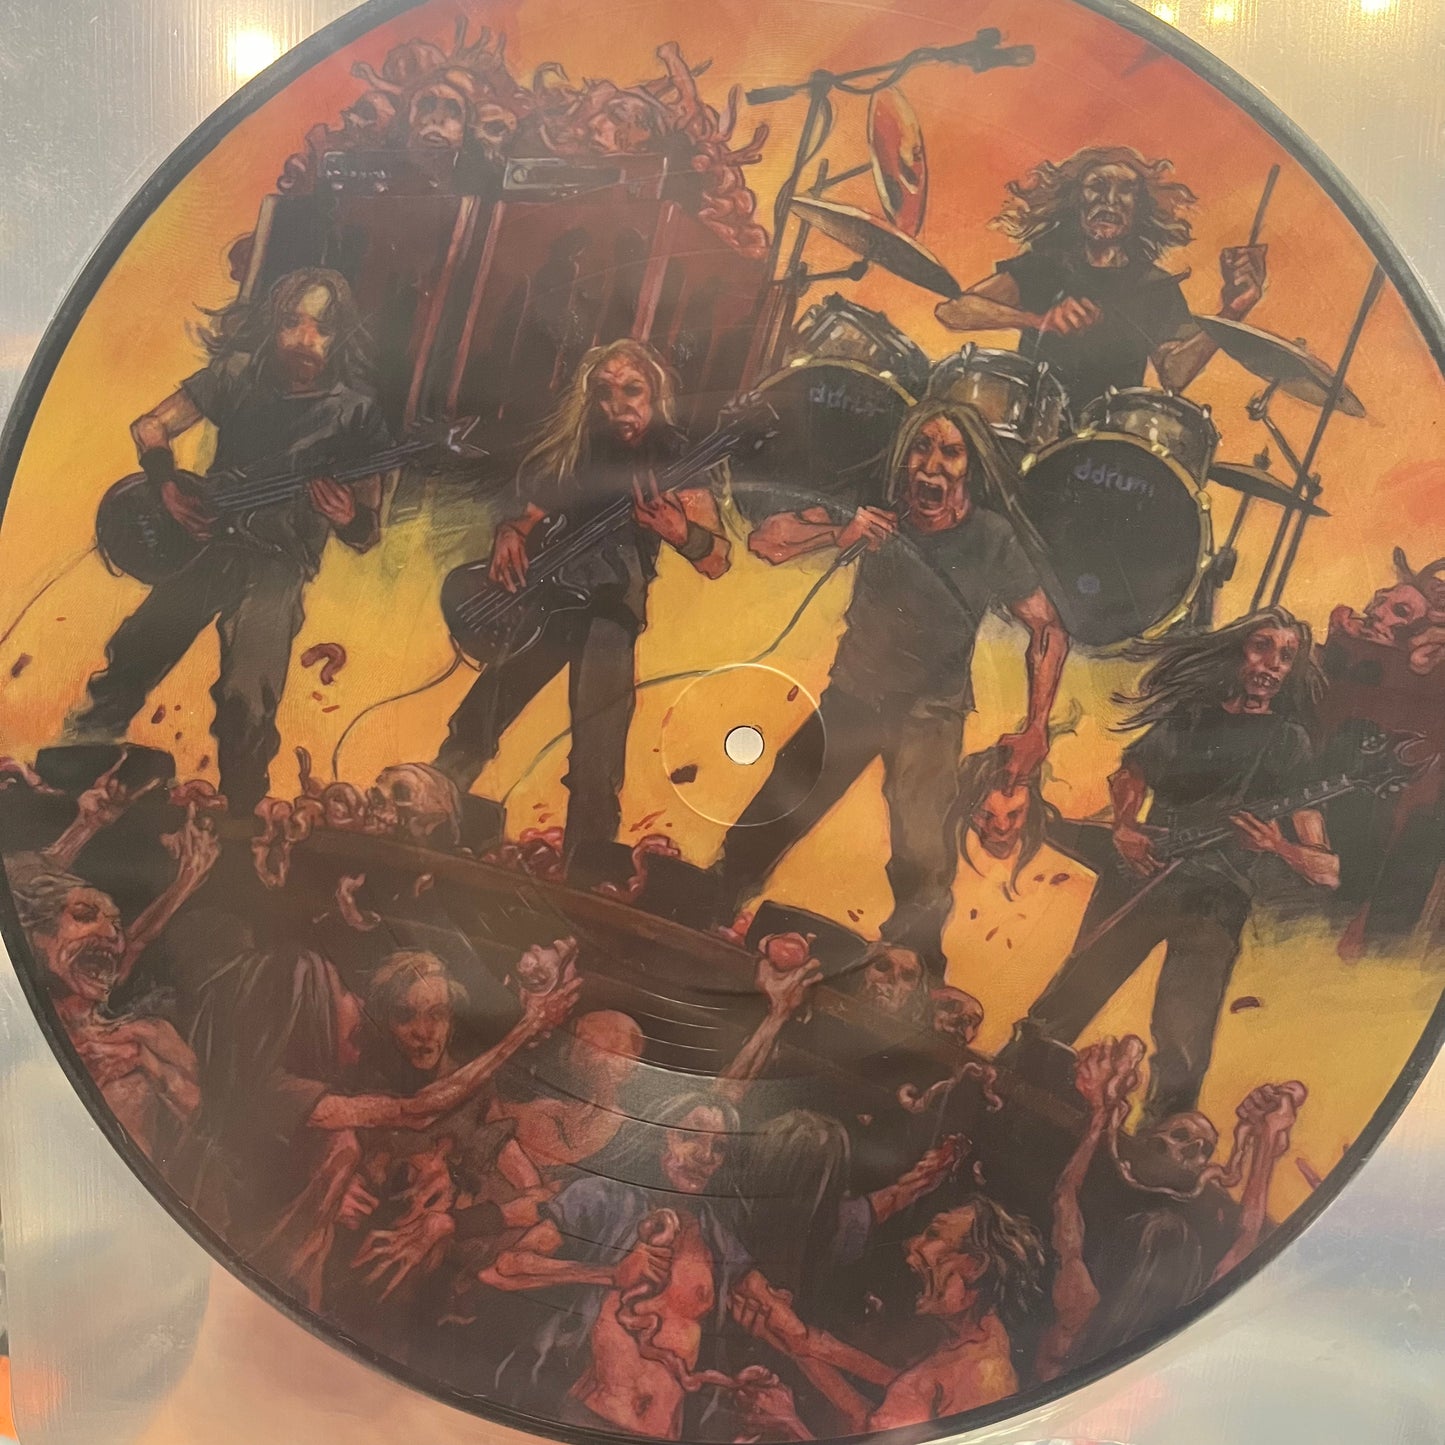 Cannibal Corpse - Torturing & Eviscerating (Picture Disc) (Used LP)